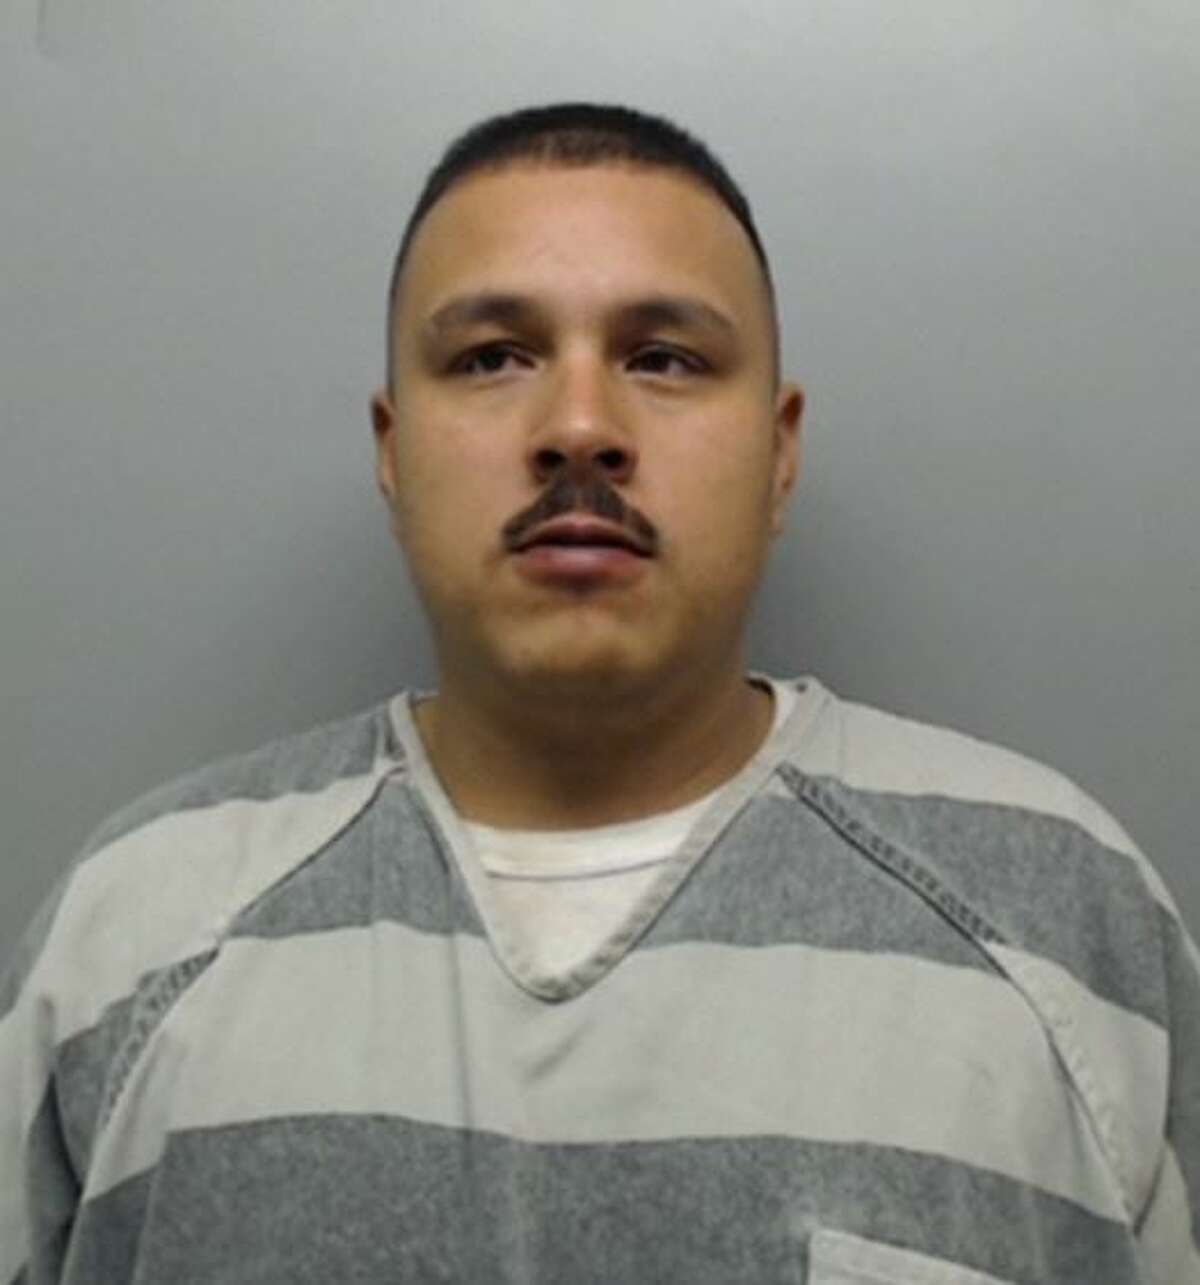 Eduardo Casiano, 29, was charged with aggravated assault with a firearm.